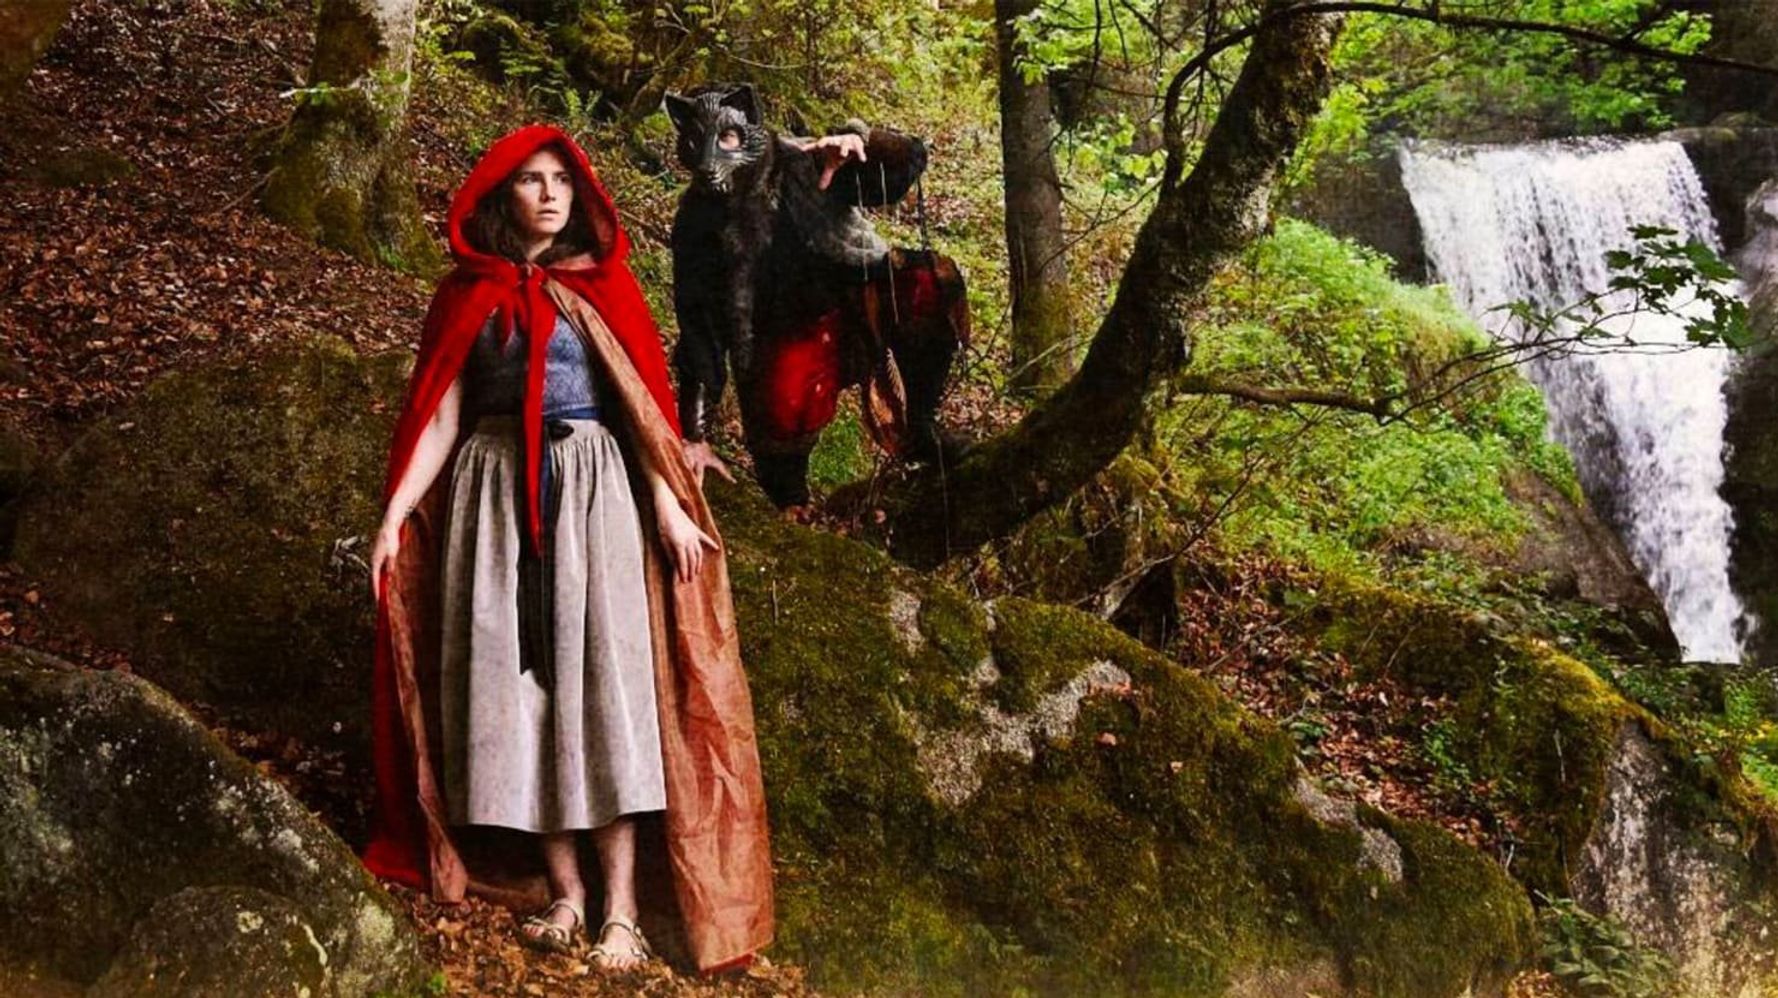 Big Bad Wolf beau stalks her Little Red Riding Hood as her posts go public ...